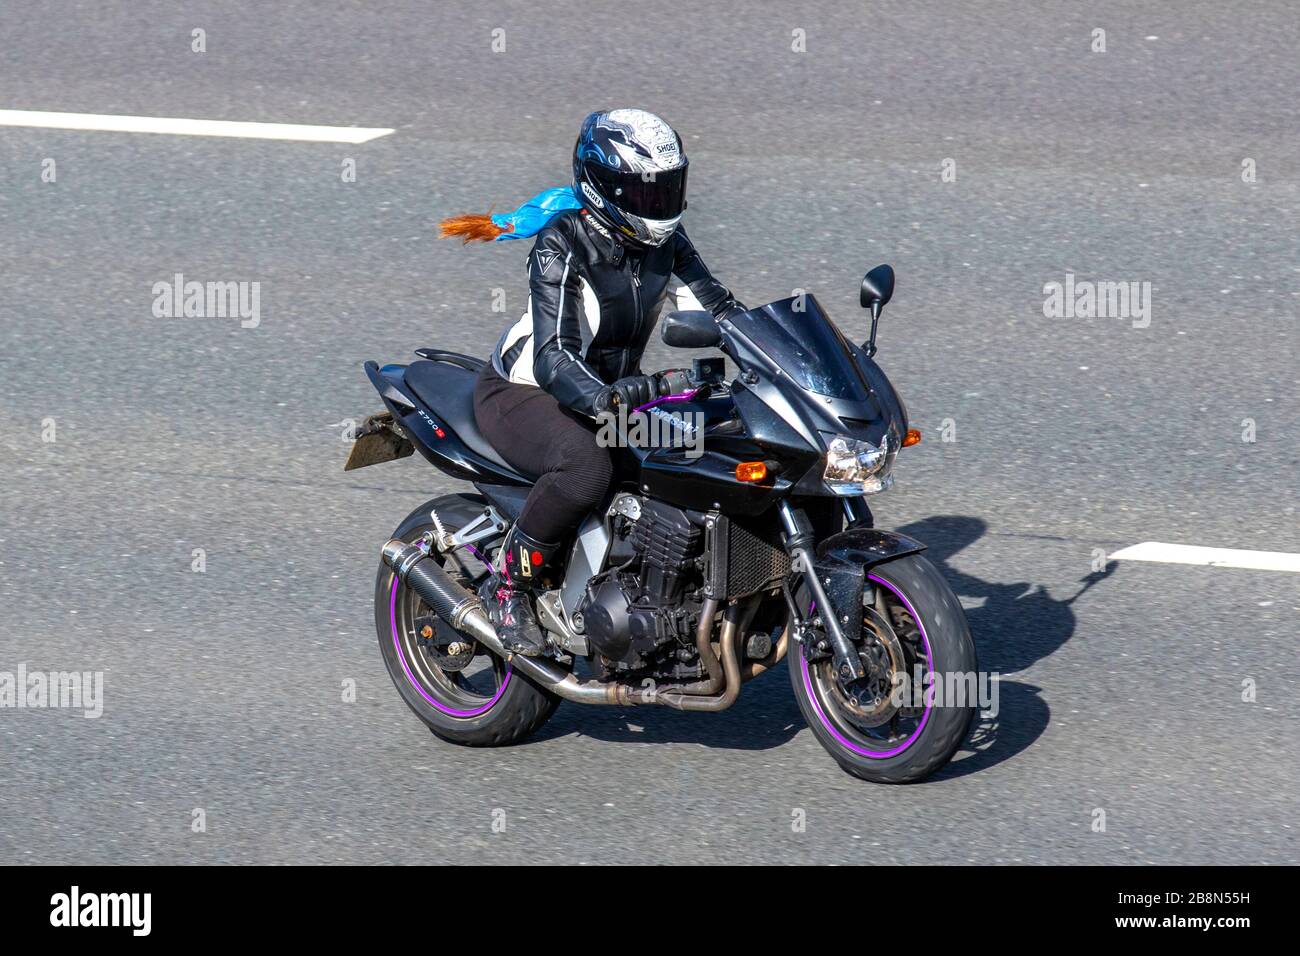 Kawasaki Z750 Motorcycle High Resolution Stock Photography and Images -  Alamy